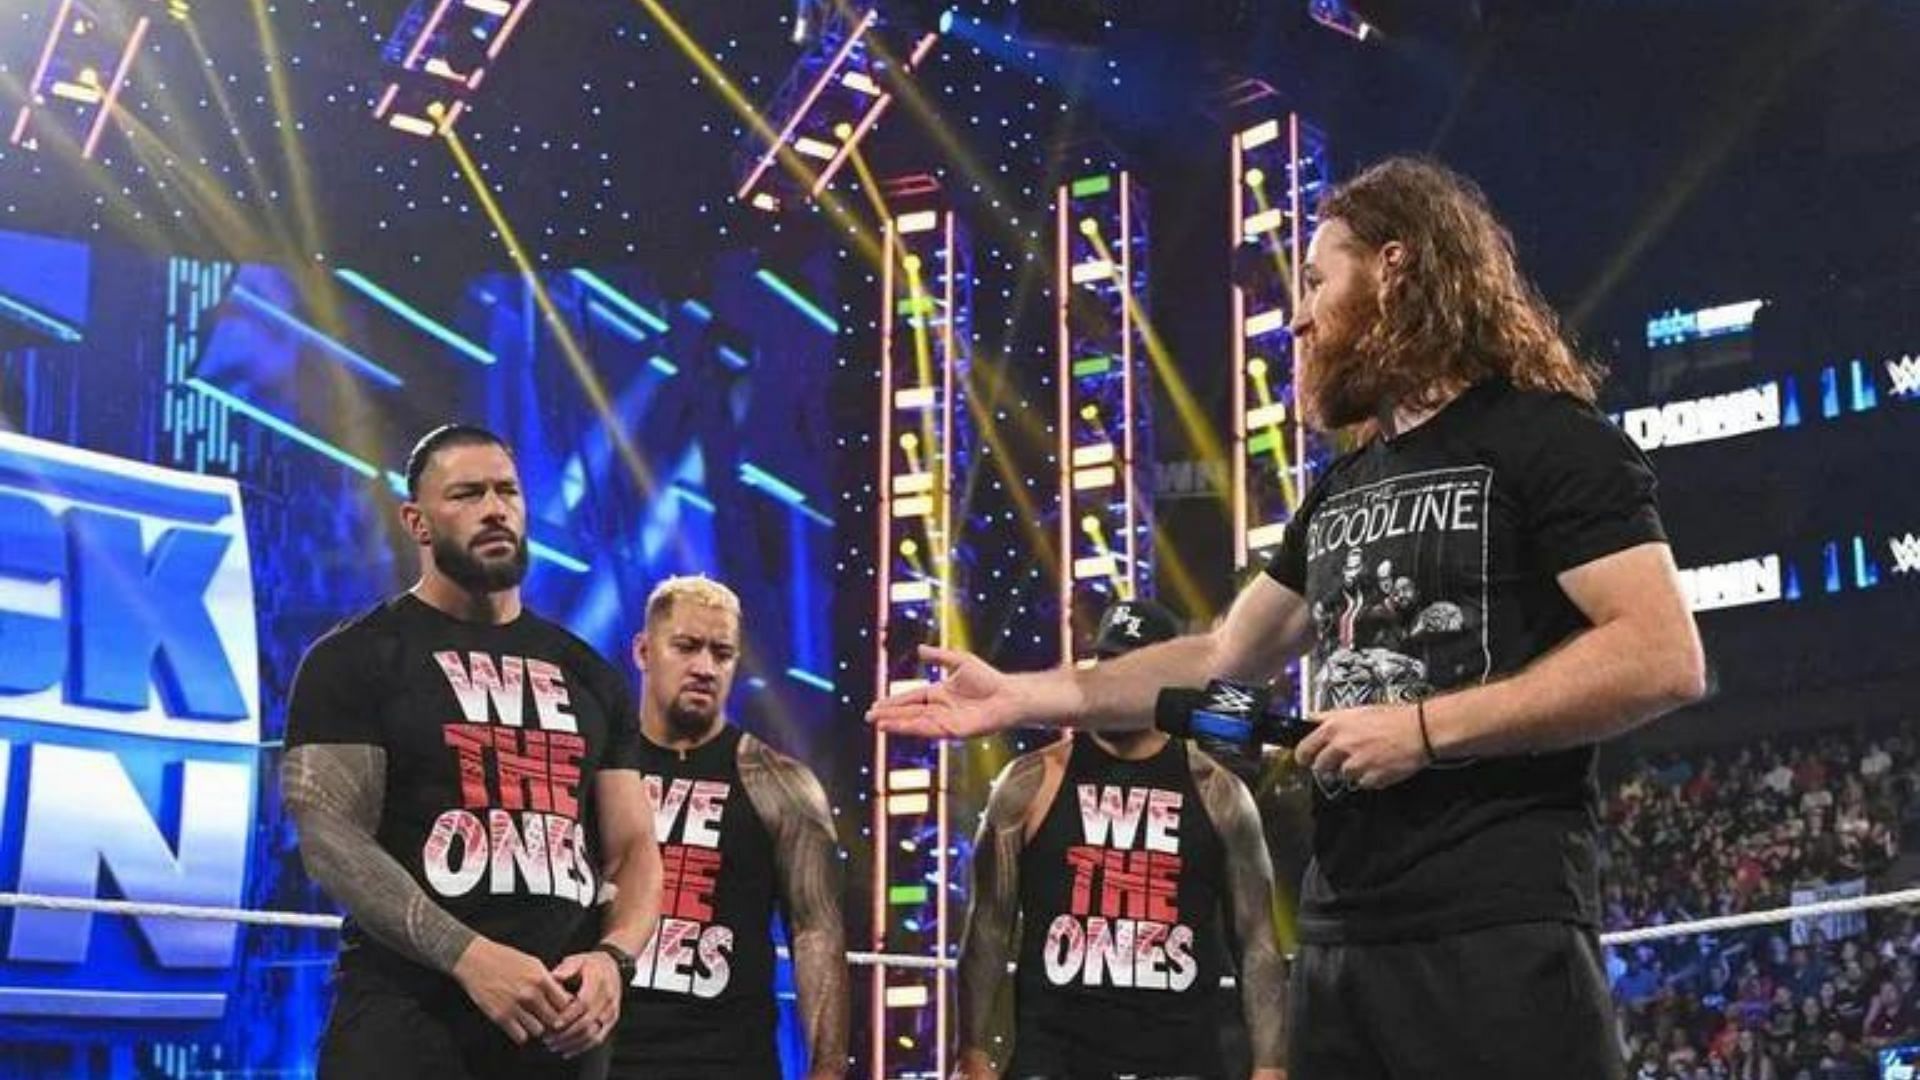 "People will do anything for a T-shirt these days" - Roman Reigns' former rival takes a shot at Sami Zayn after WWE SmackDown